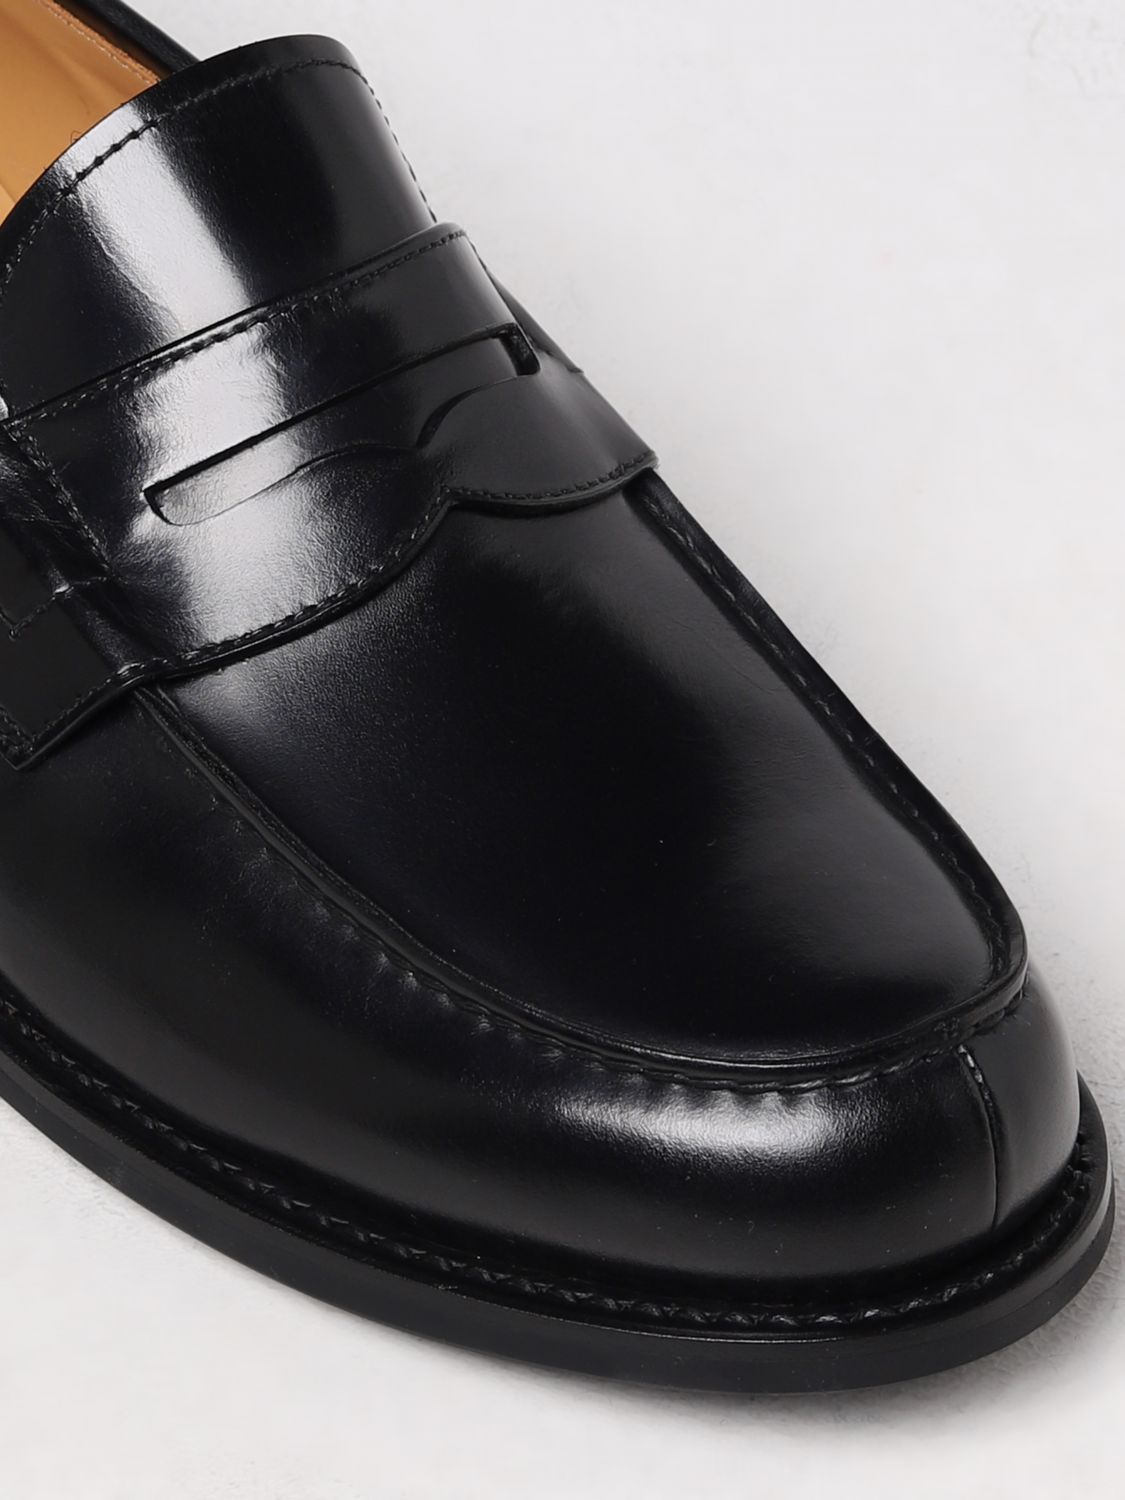 Loafers Church's: Church's loafers for men black 4